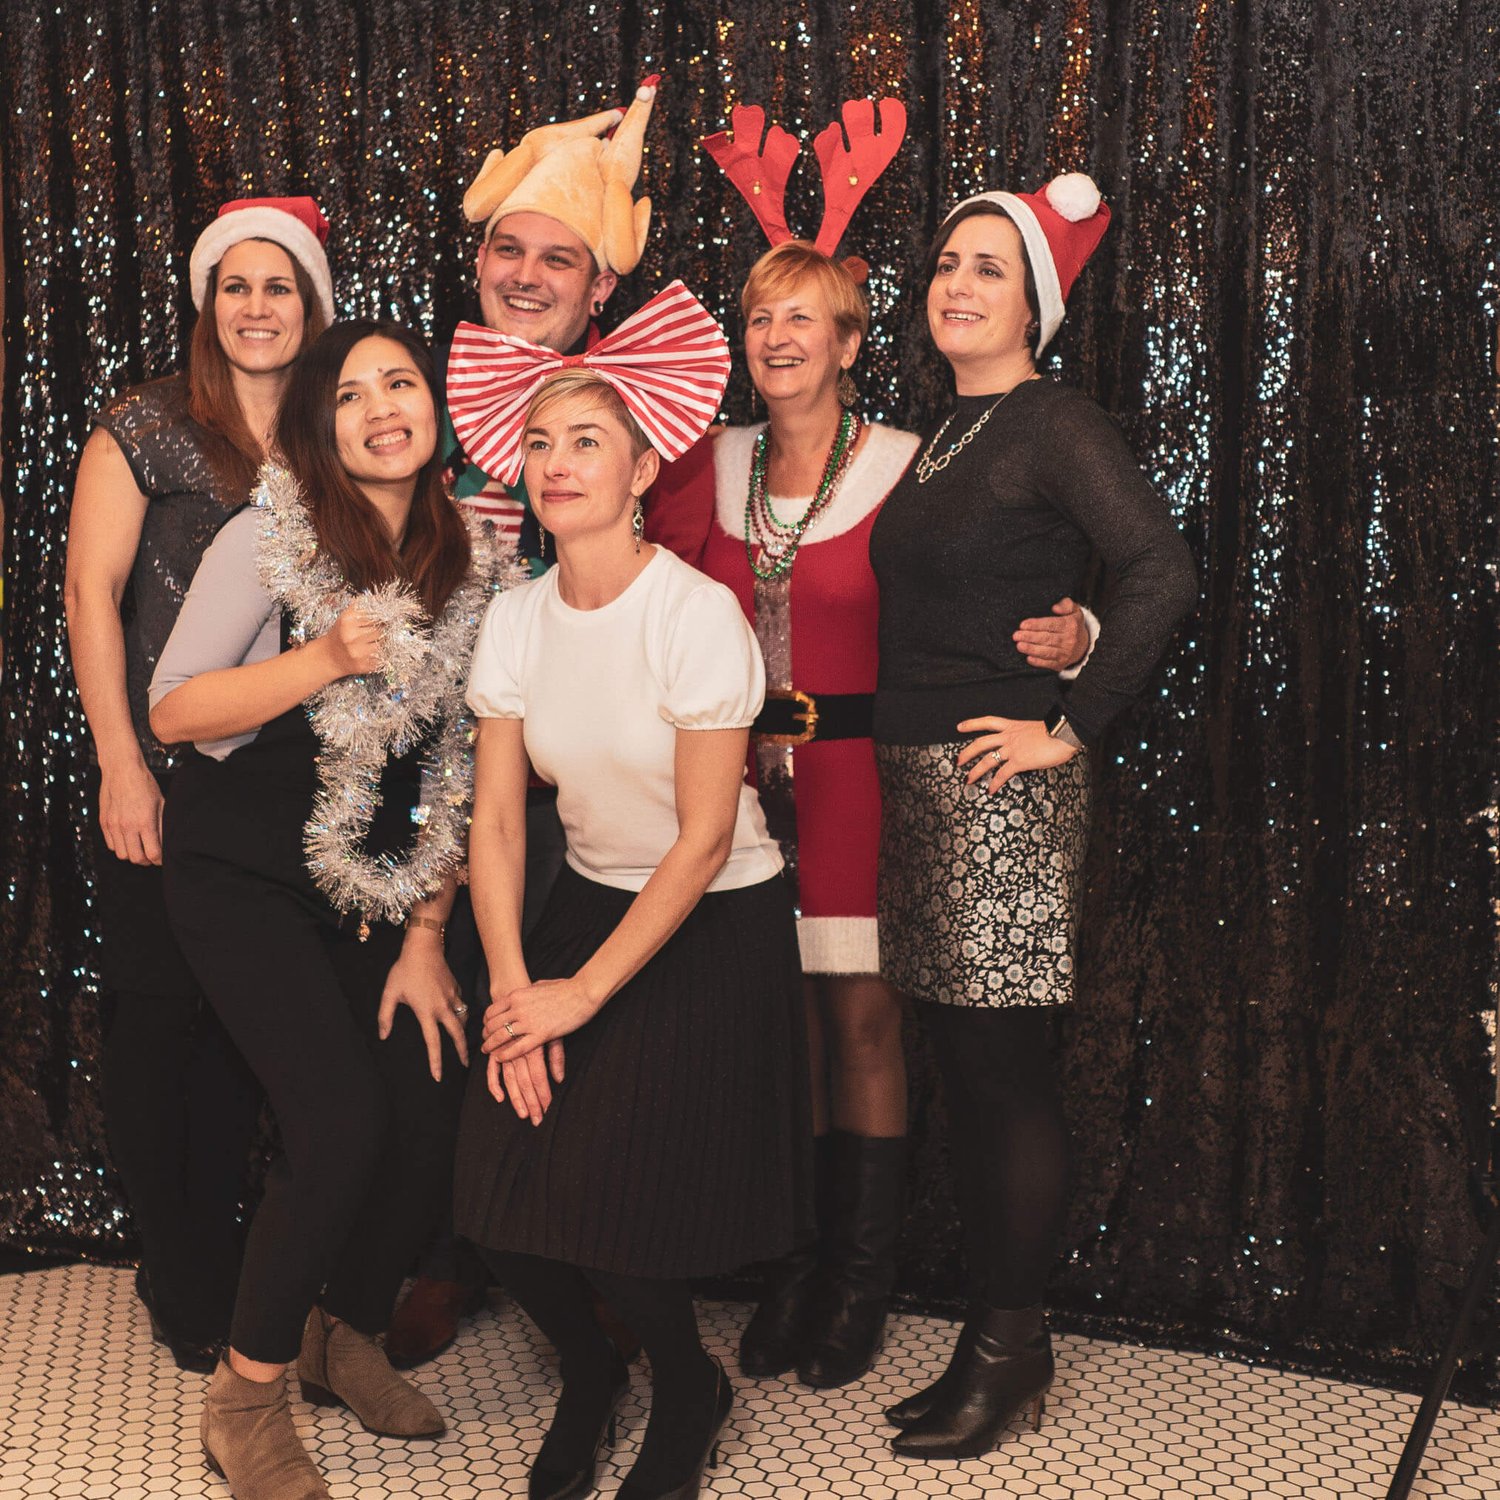 Top 5 Holiday Party Entertainment Ideas